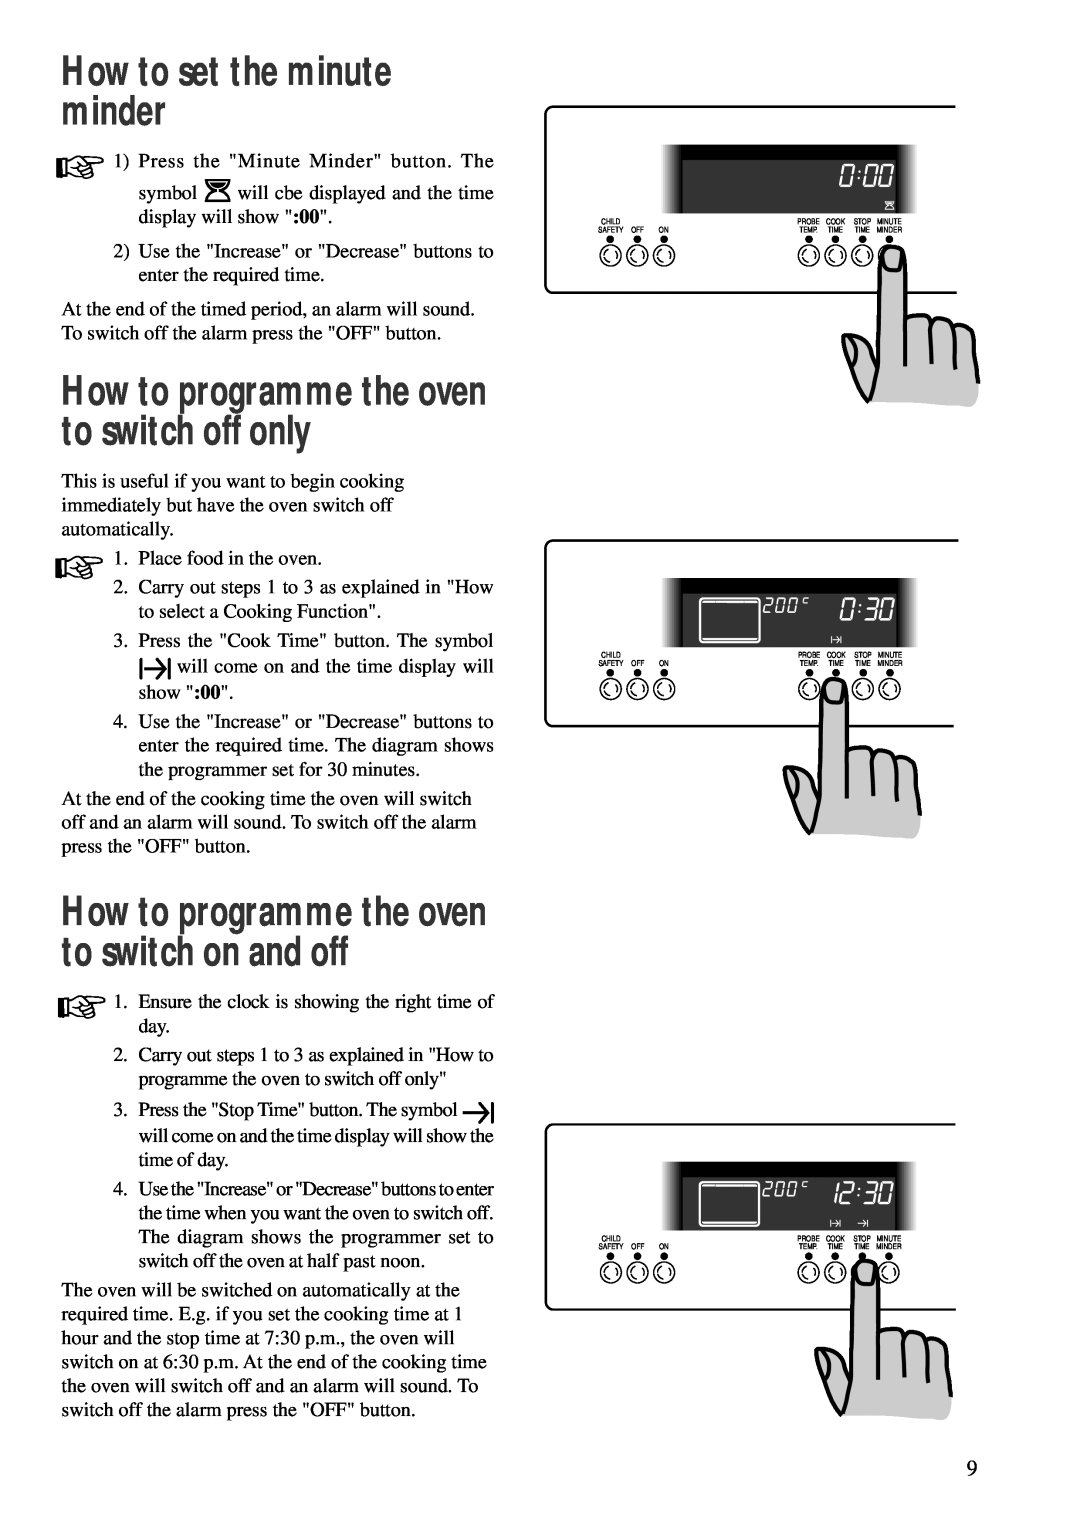 Zanussi ZBM 890 manual How to set the minute minder, How to programme the oven to switch on and off 